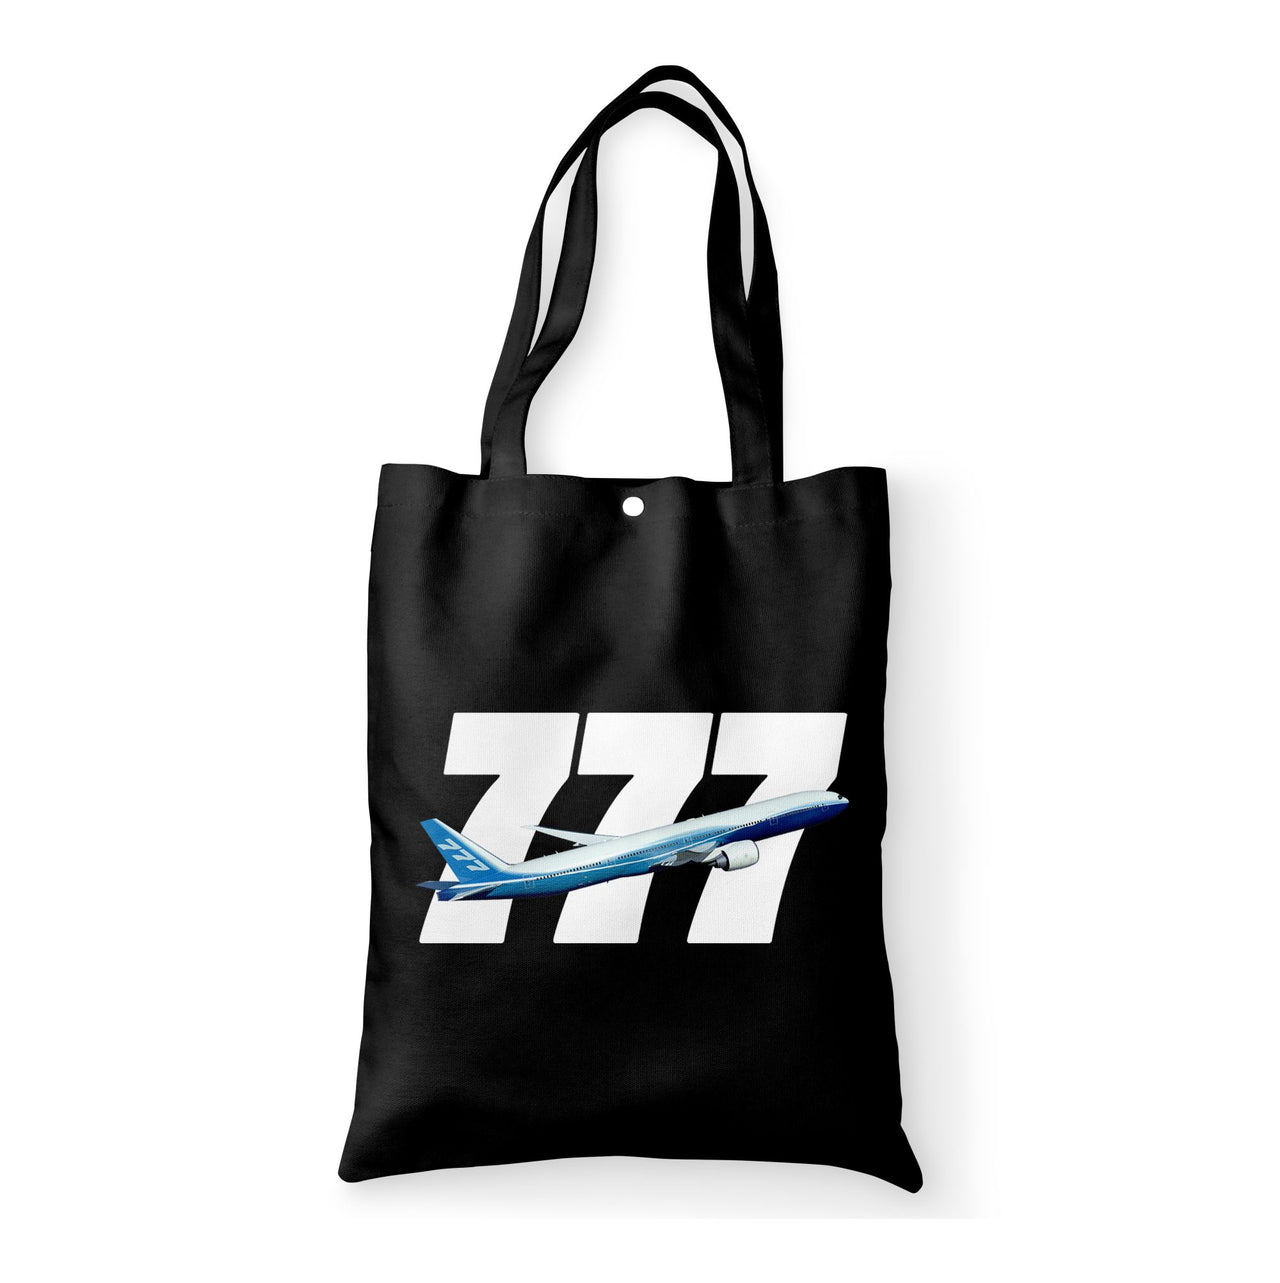 Super Boeing 777 Intercontinental Designed Tote Bags